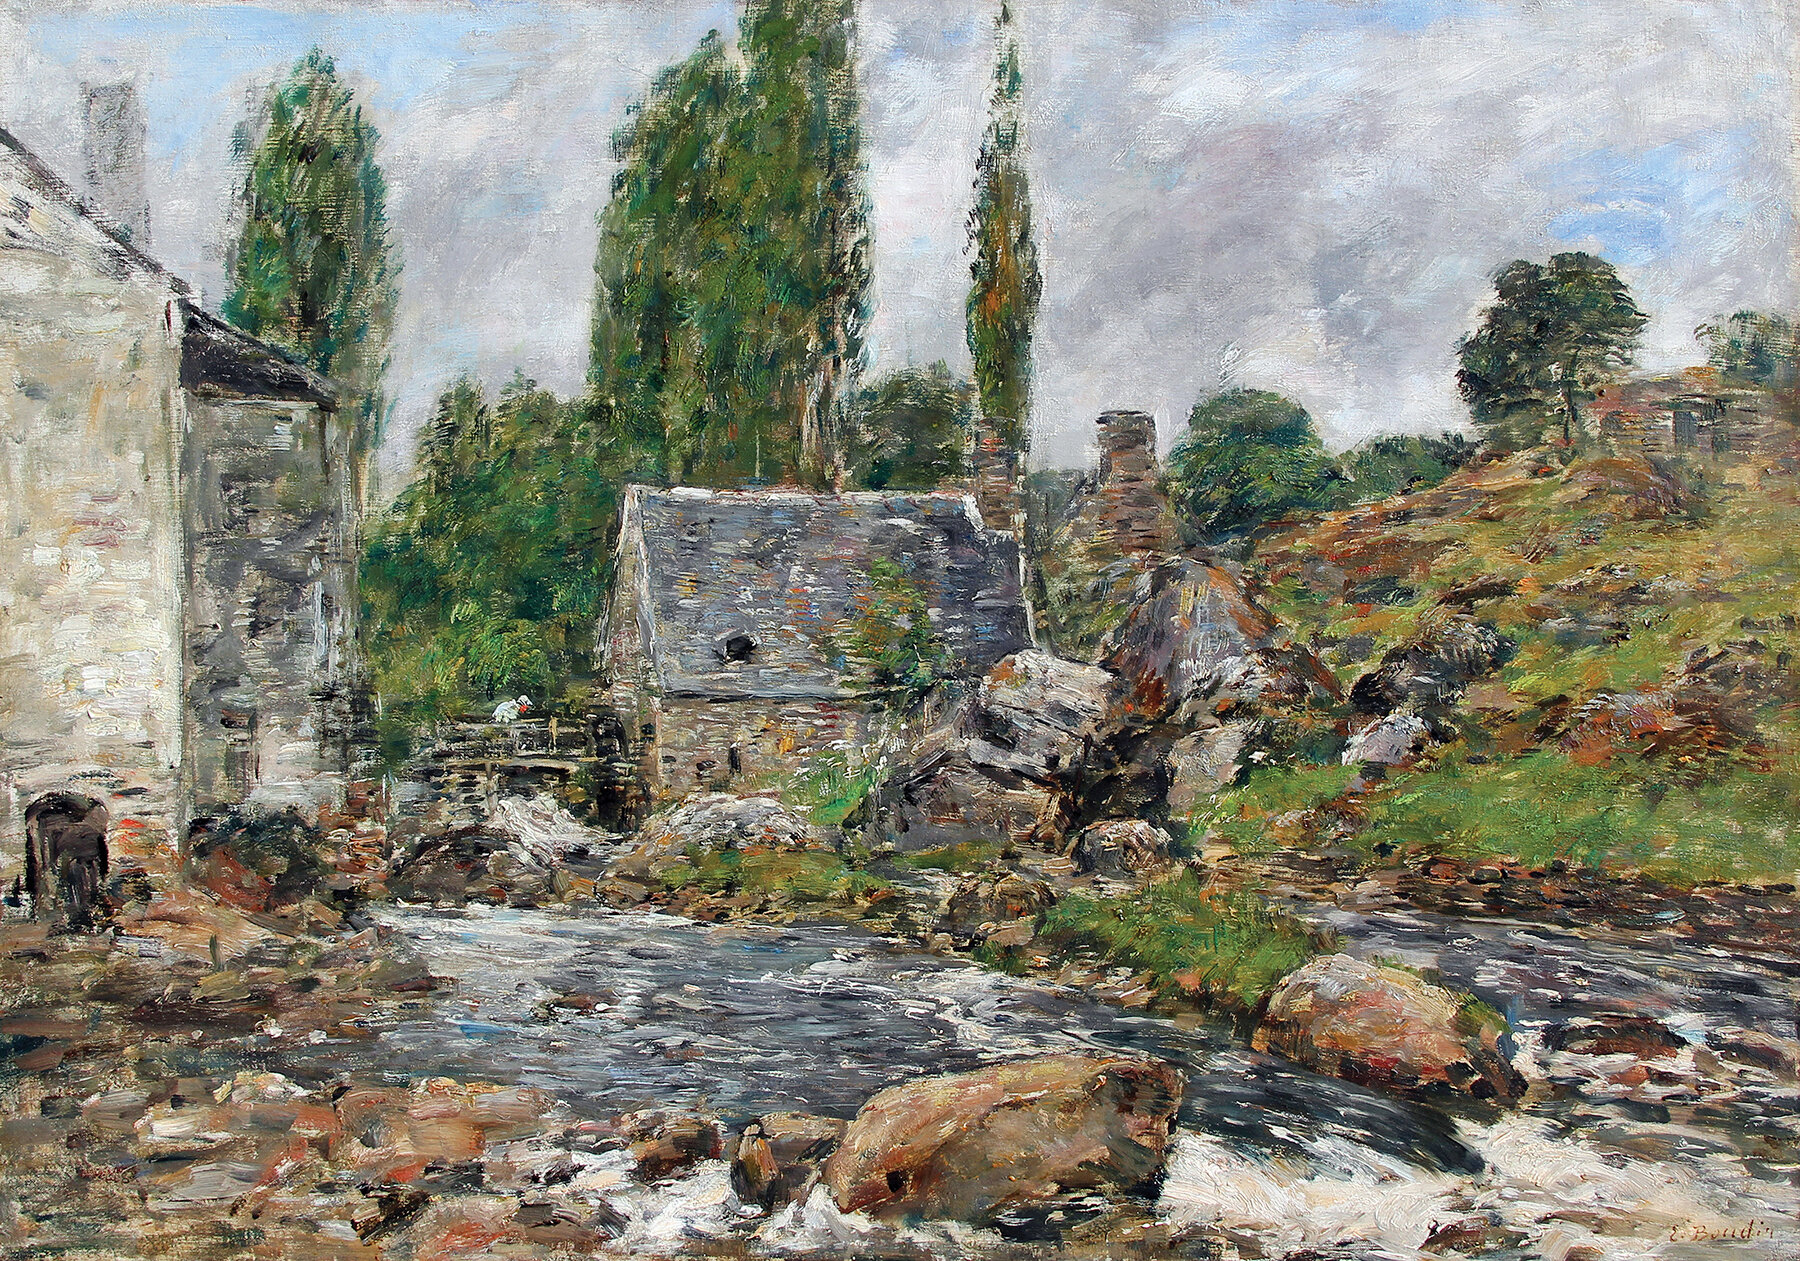   EUGÈNE BOUDIN    French, 1824–1898   Pont-Aven - La Rivière après la Pluie   With the Atelier stamp E. Boudin Oil on canvas 18½ x 25¾ inches (47 x 65.5 cm); Framed: 28 x 35½ inches (71 x 90 cm)  Painted in May 1897. 